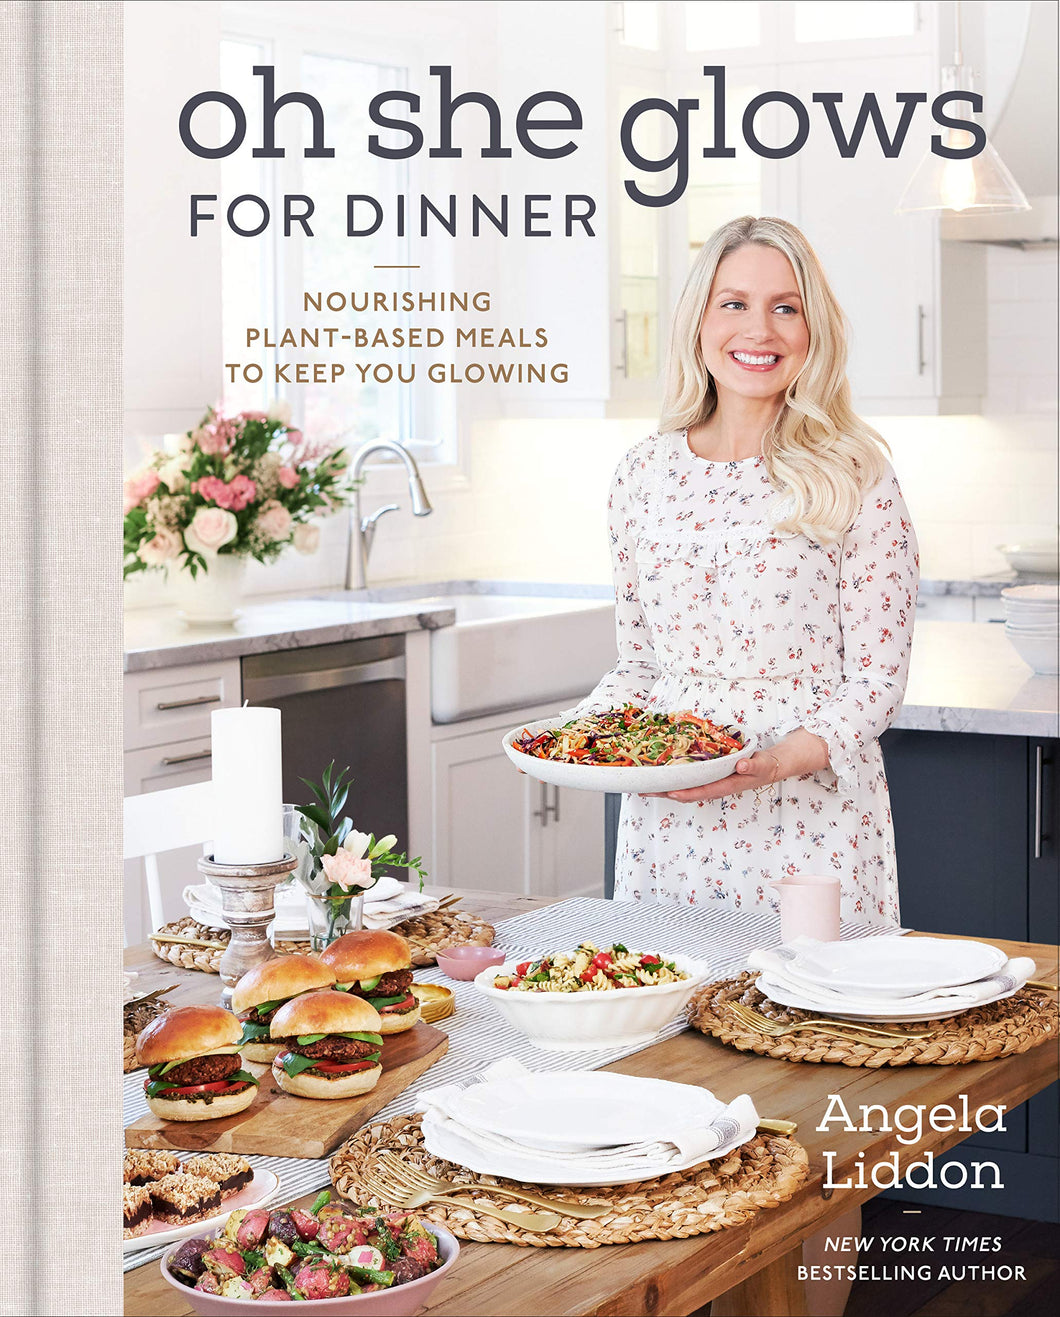 Oh She Glows For Dinner by Angela Liddon